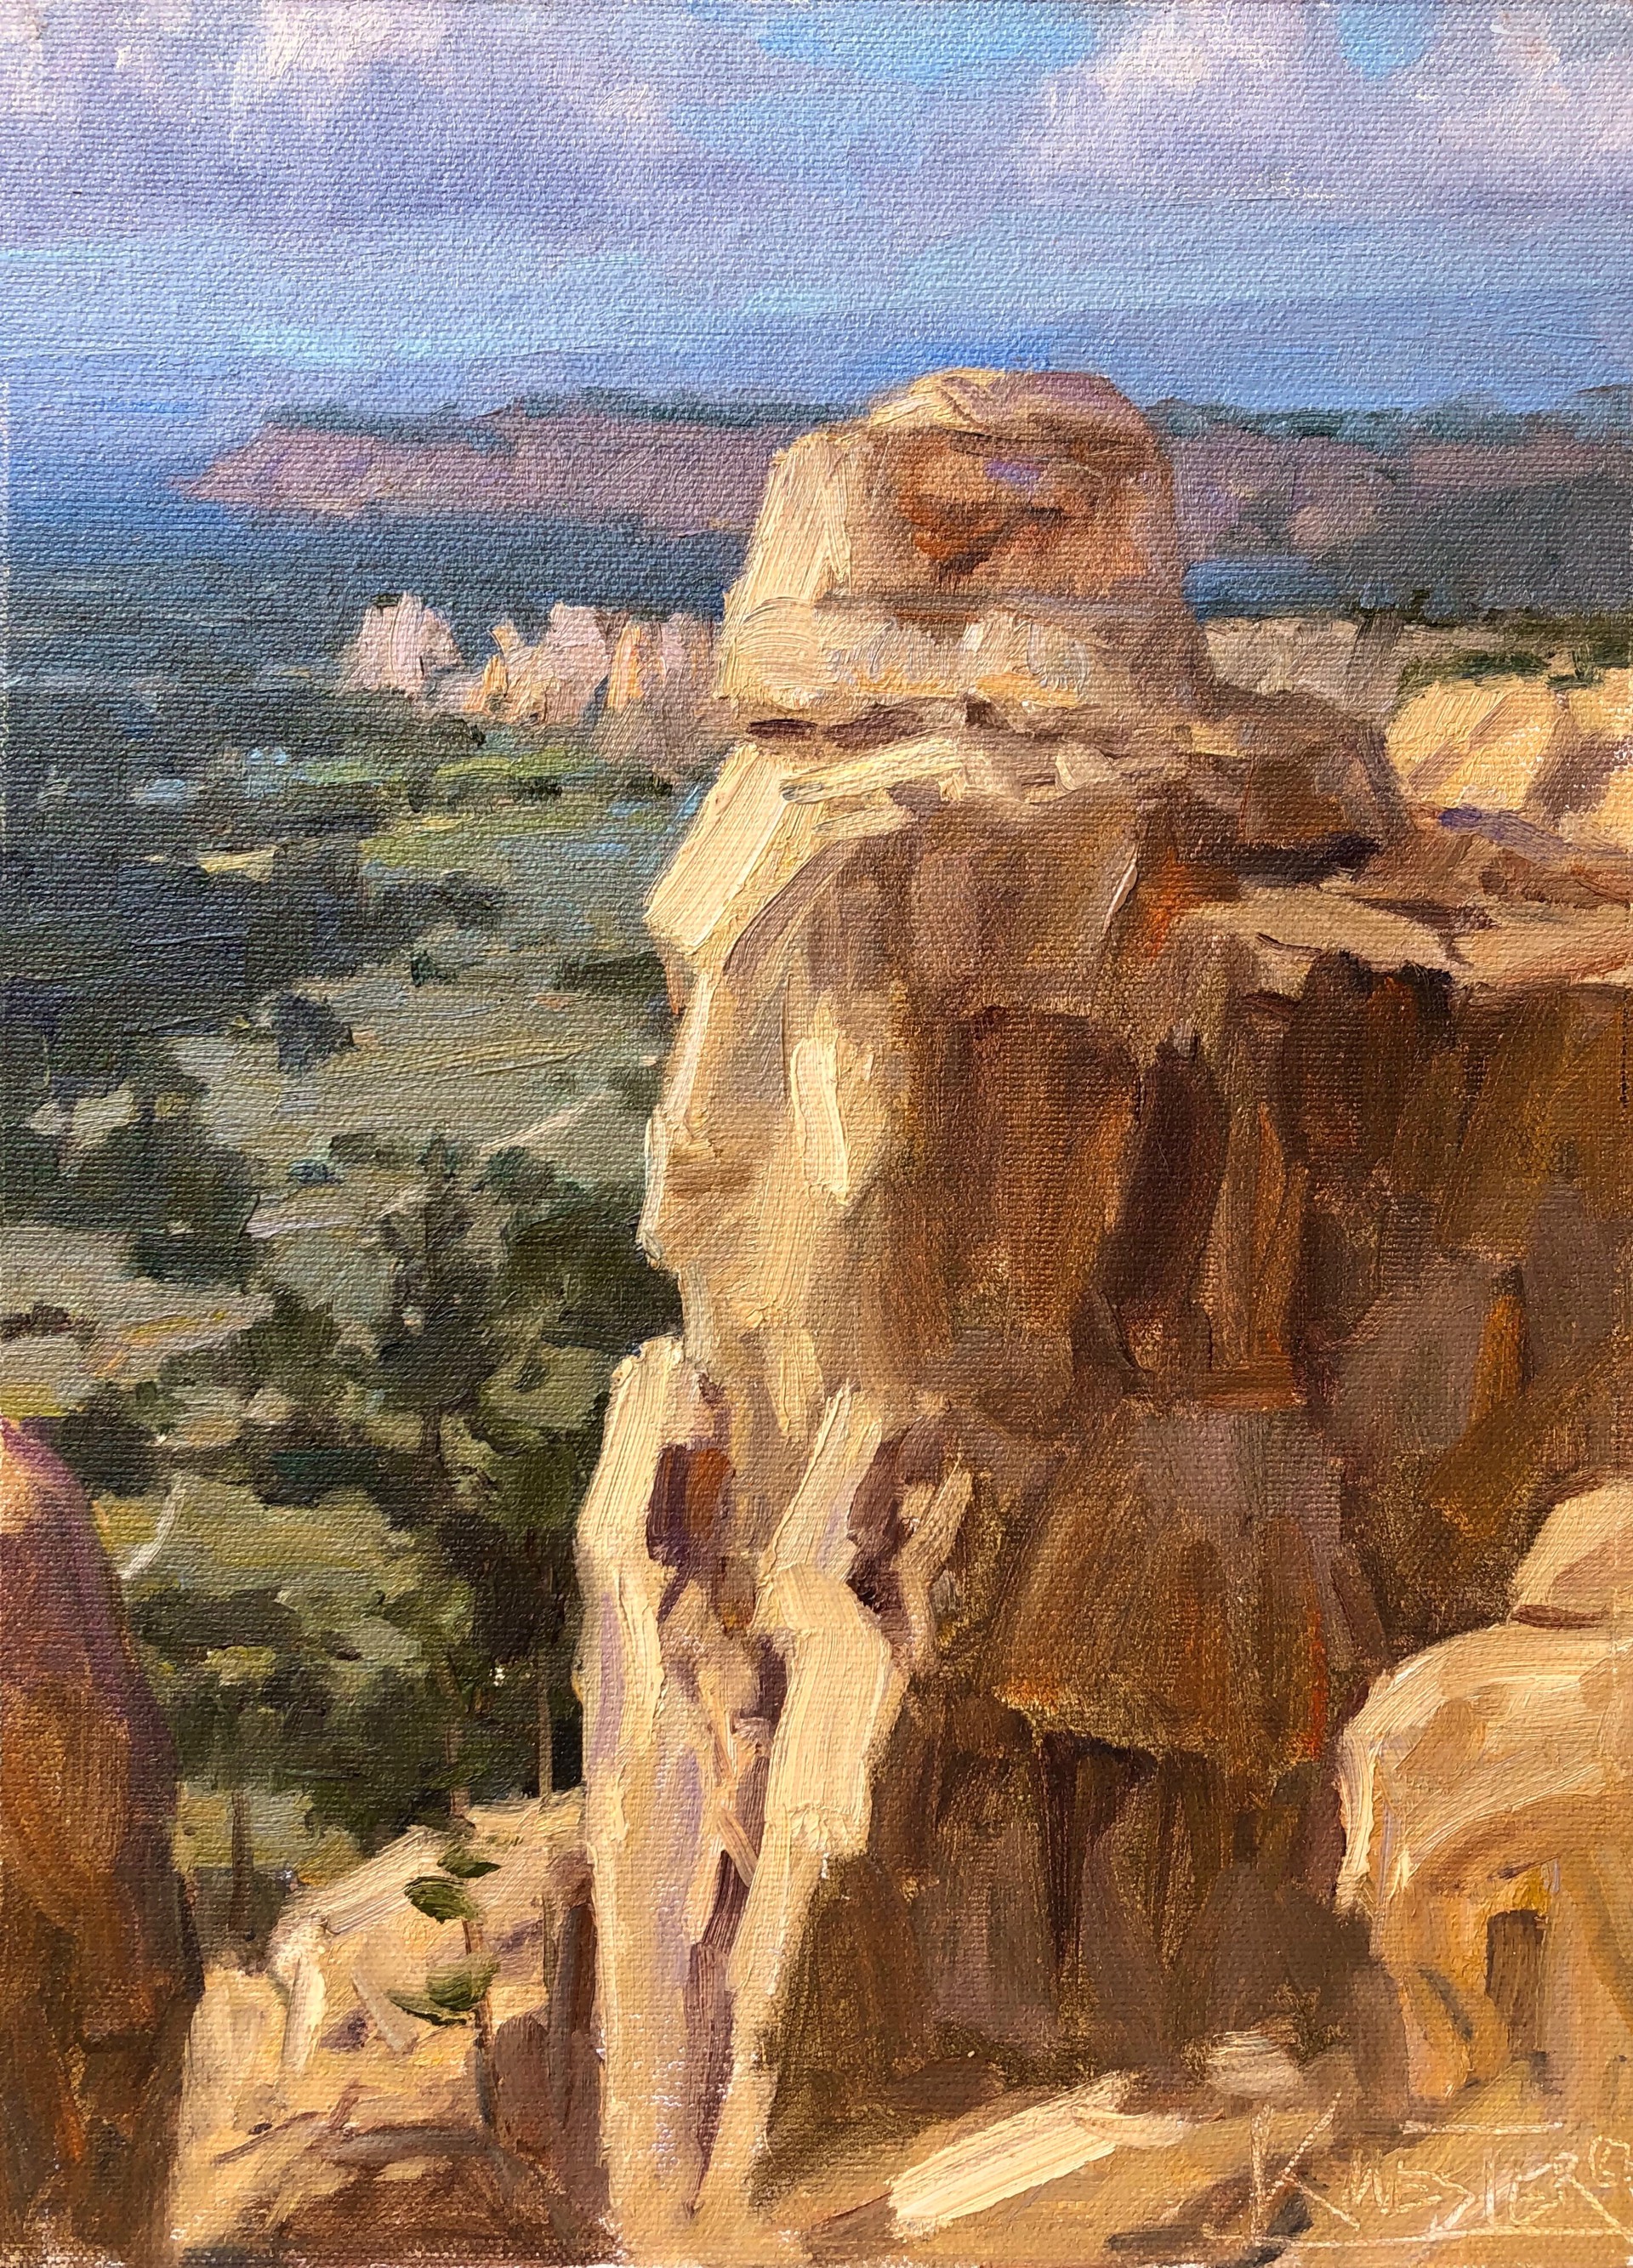 North View from Sandstone Bluffs by Robert Kuester